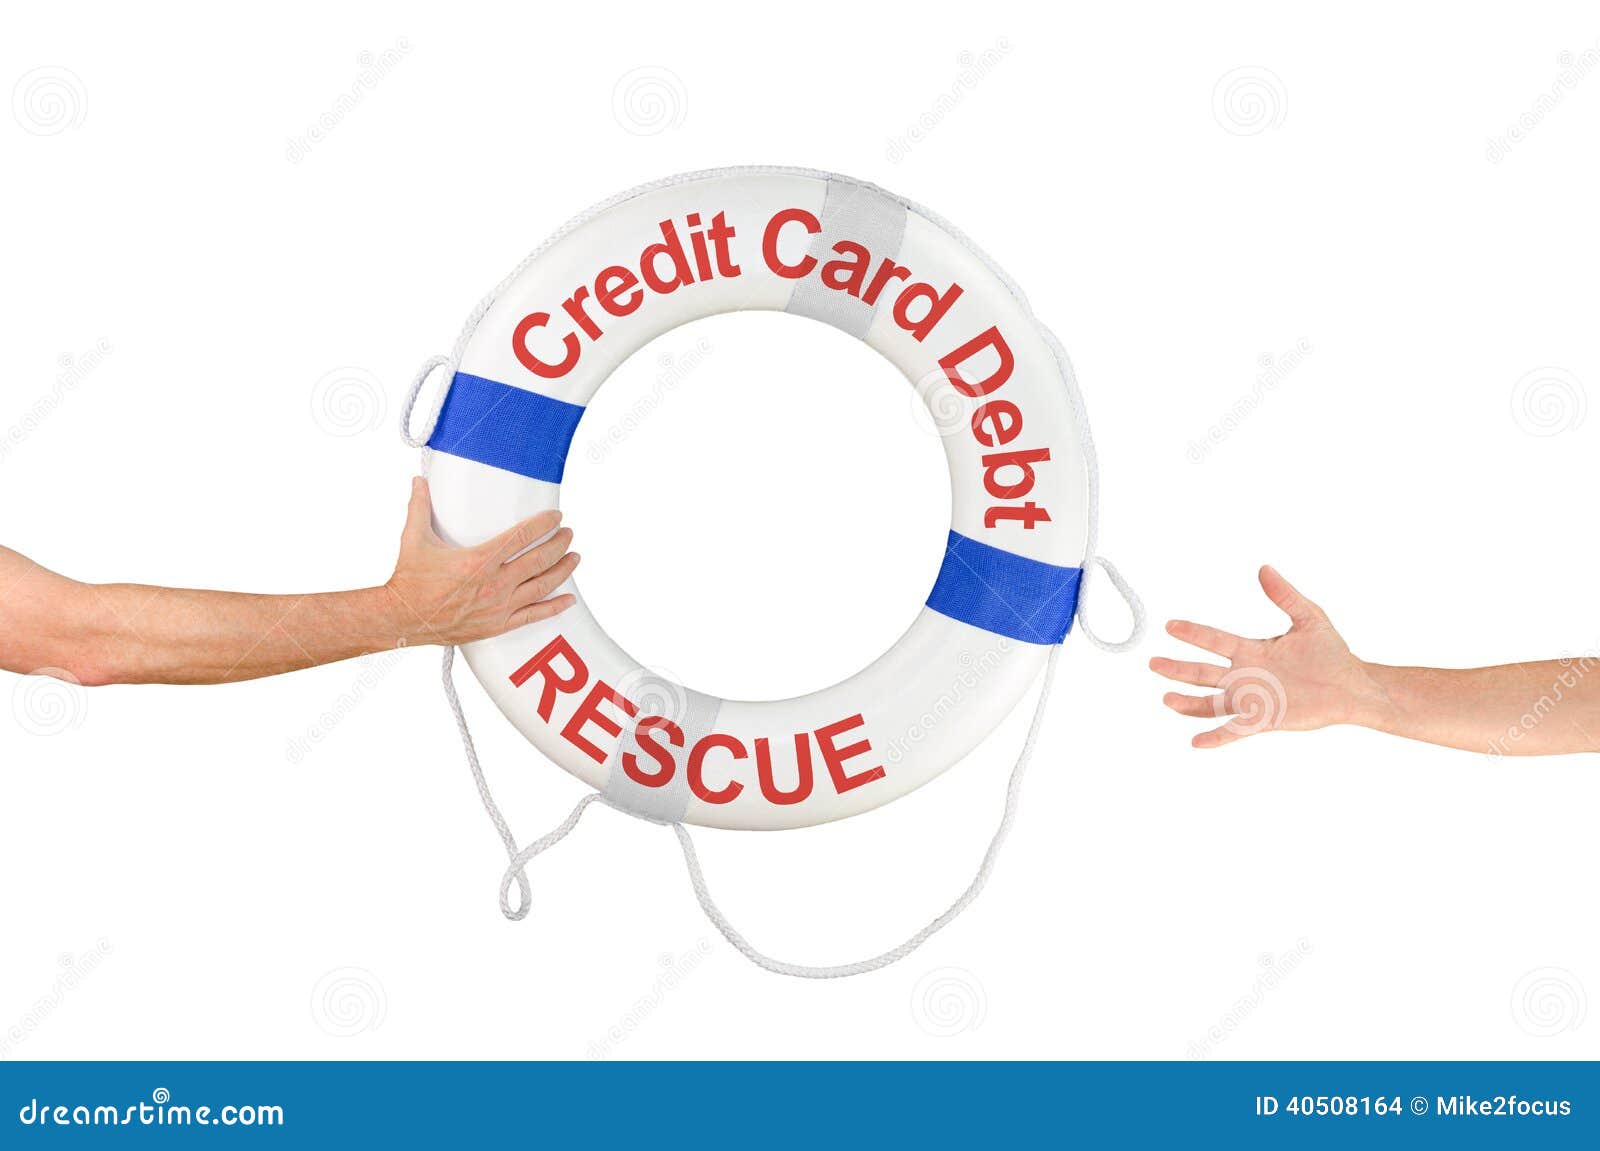 credit card debt rescue life buoy ring and hands